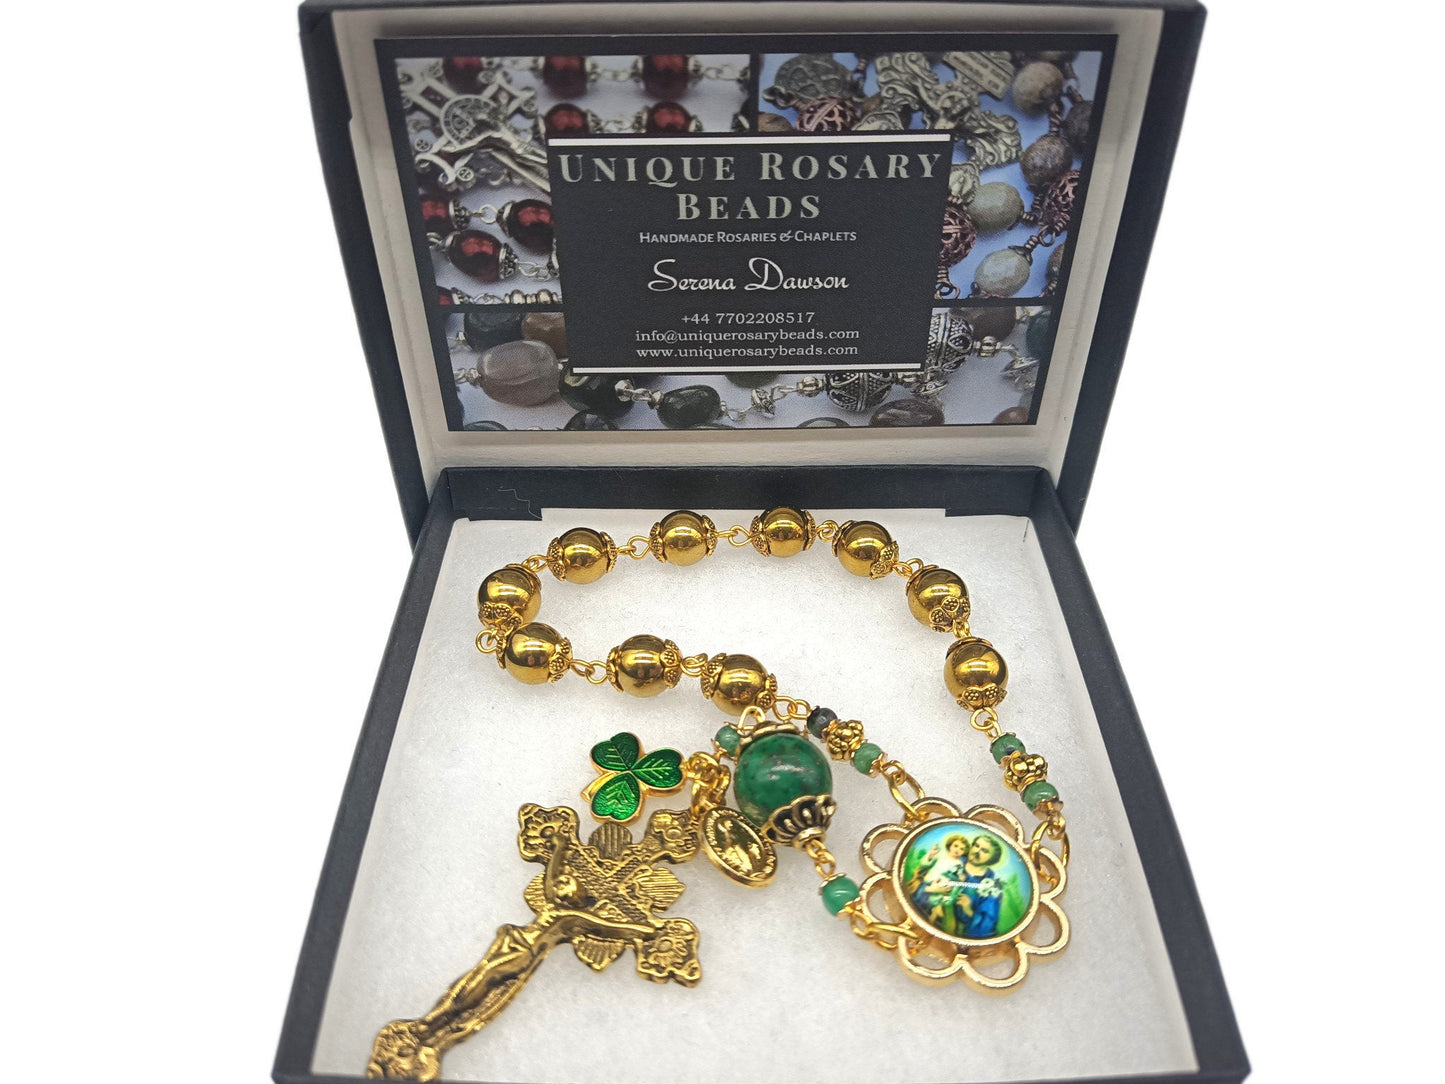 Saint Joseph unique rosary beads single decade with gold hematite and gemstone beads, crucifix and St. Joseph picture centre medal.